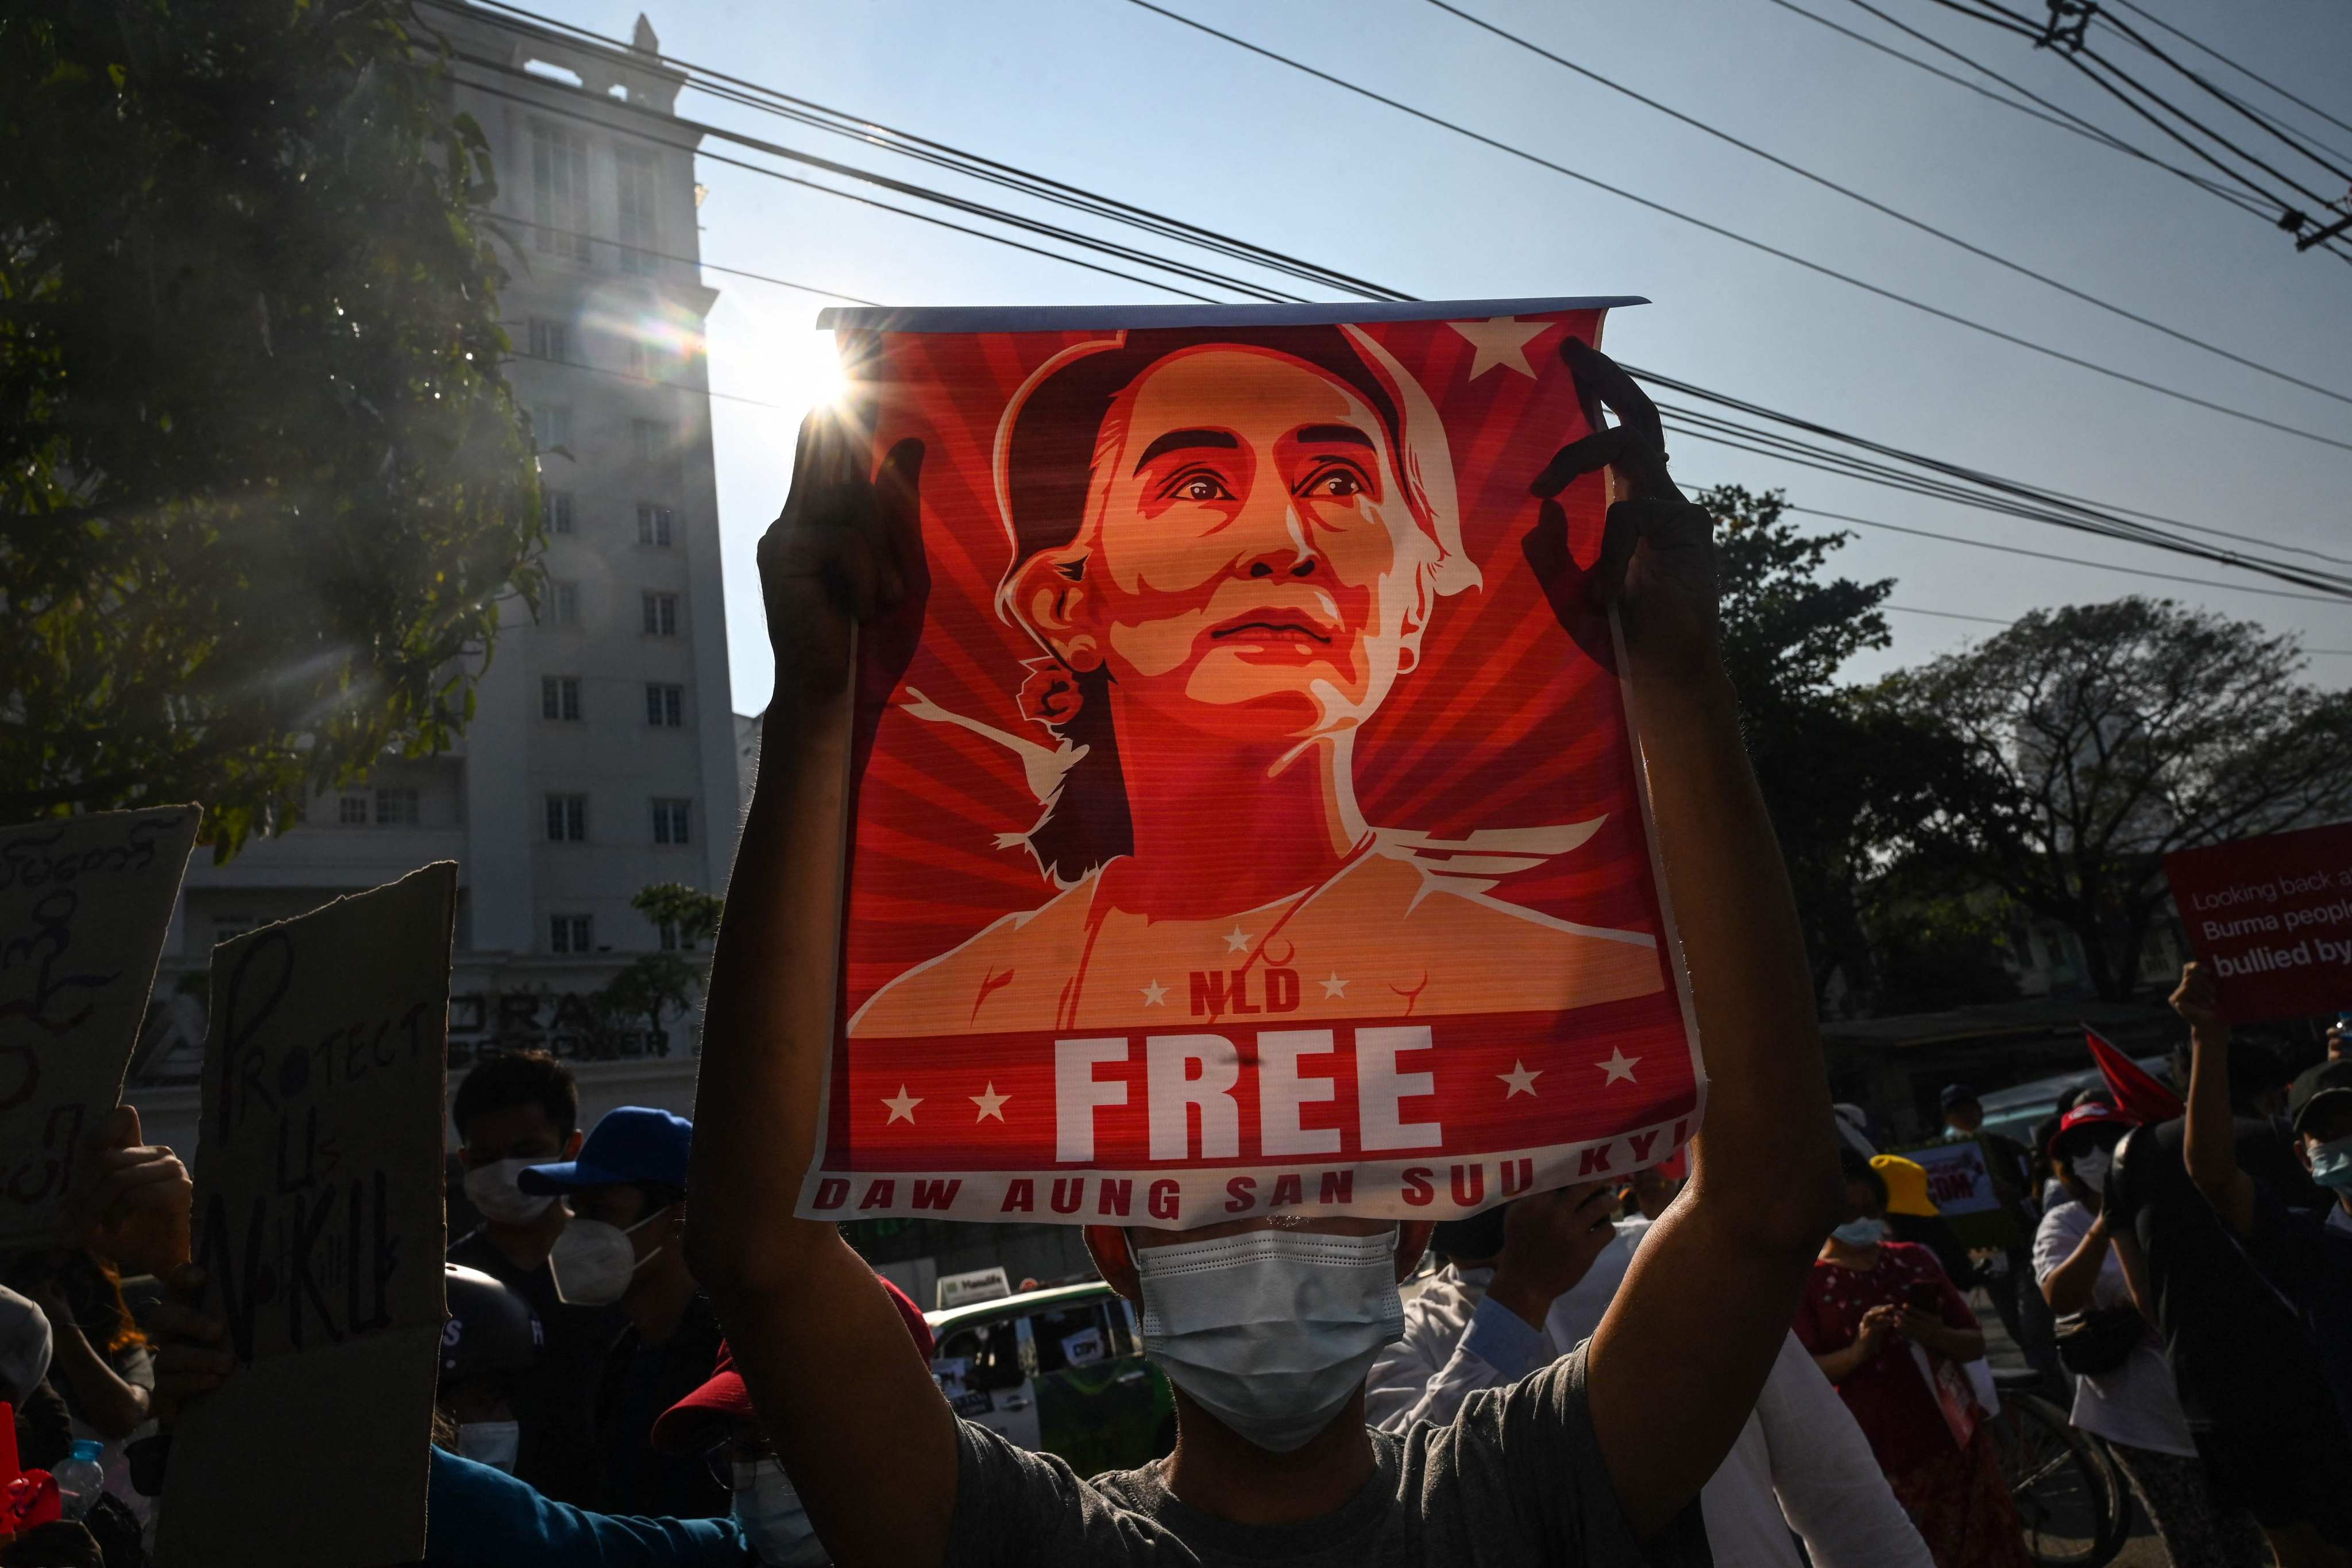 A protester in Yangon holds up a poster featuring Aung San Suu Kyi during a demonstration in February 2021 against the military coup. Suu Kyi was sentenced to a total of 33 years imprisonment following the coup. Photo: AFP